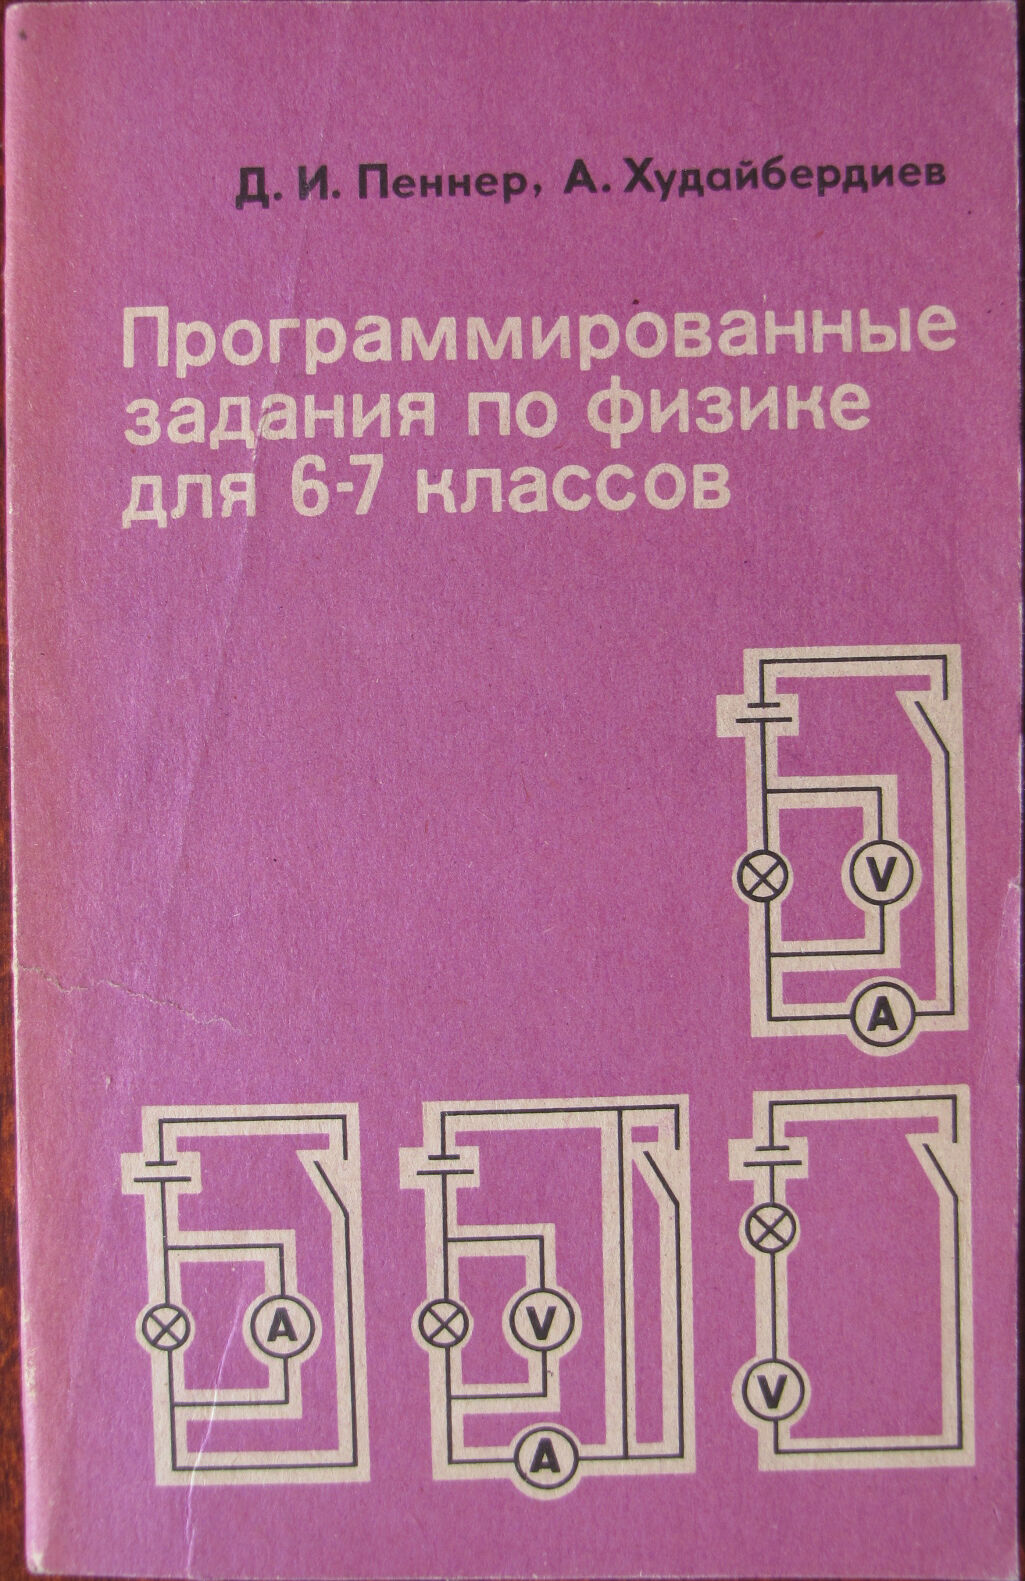 1985 Soviet Tutorial PHYSICS Book Of Problems ~ ФИЗИКА ~ Russian SCHOOL Guide 